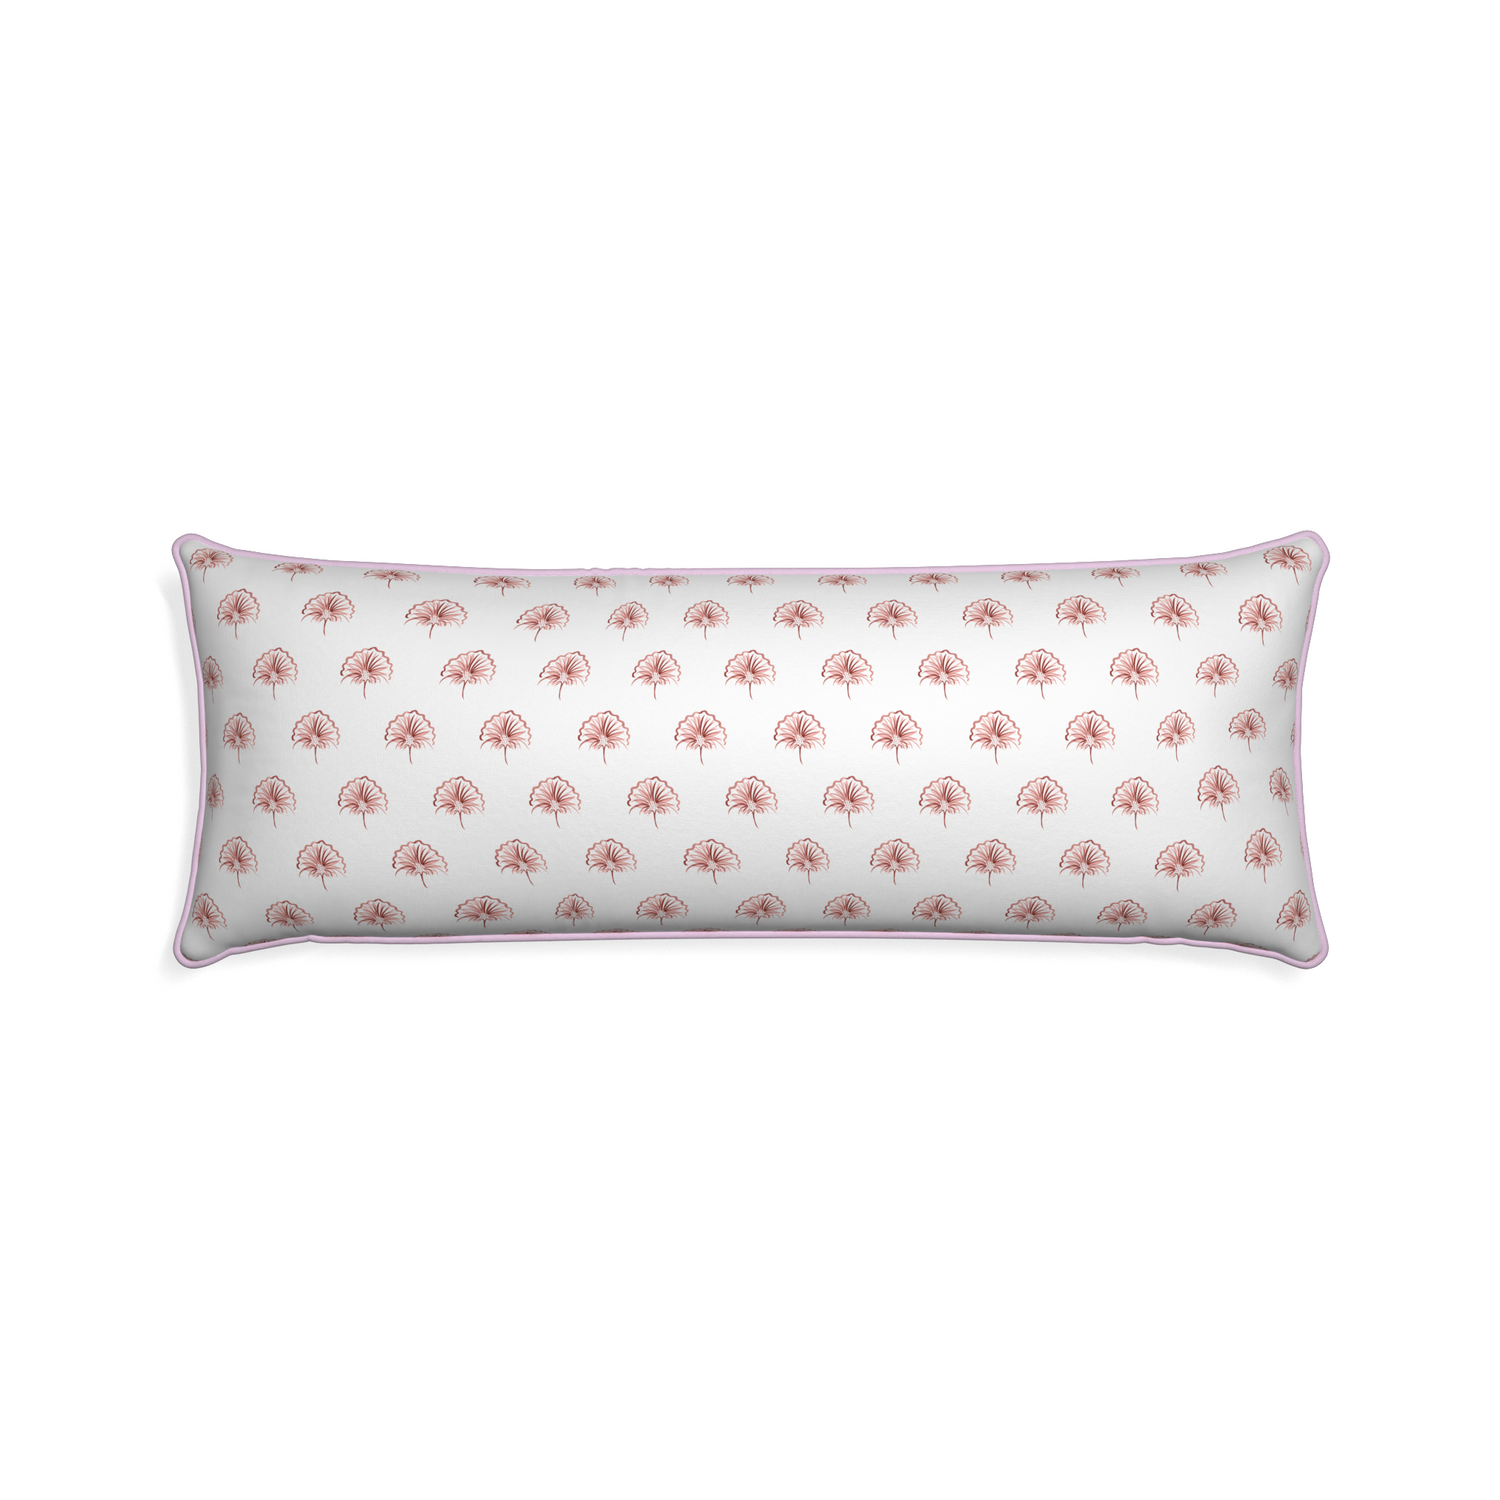 Xl-lumbar penelope rose custom floral pinkpillow with l piping on white background